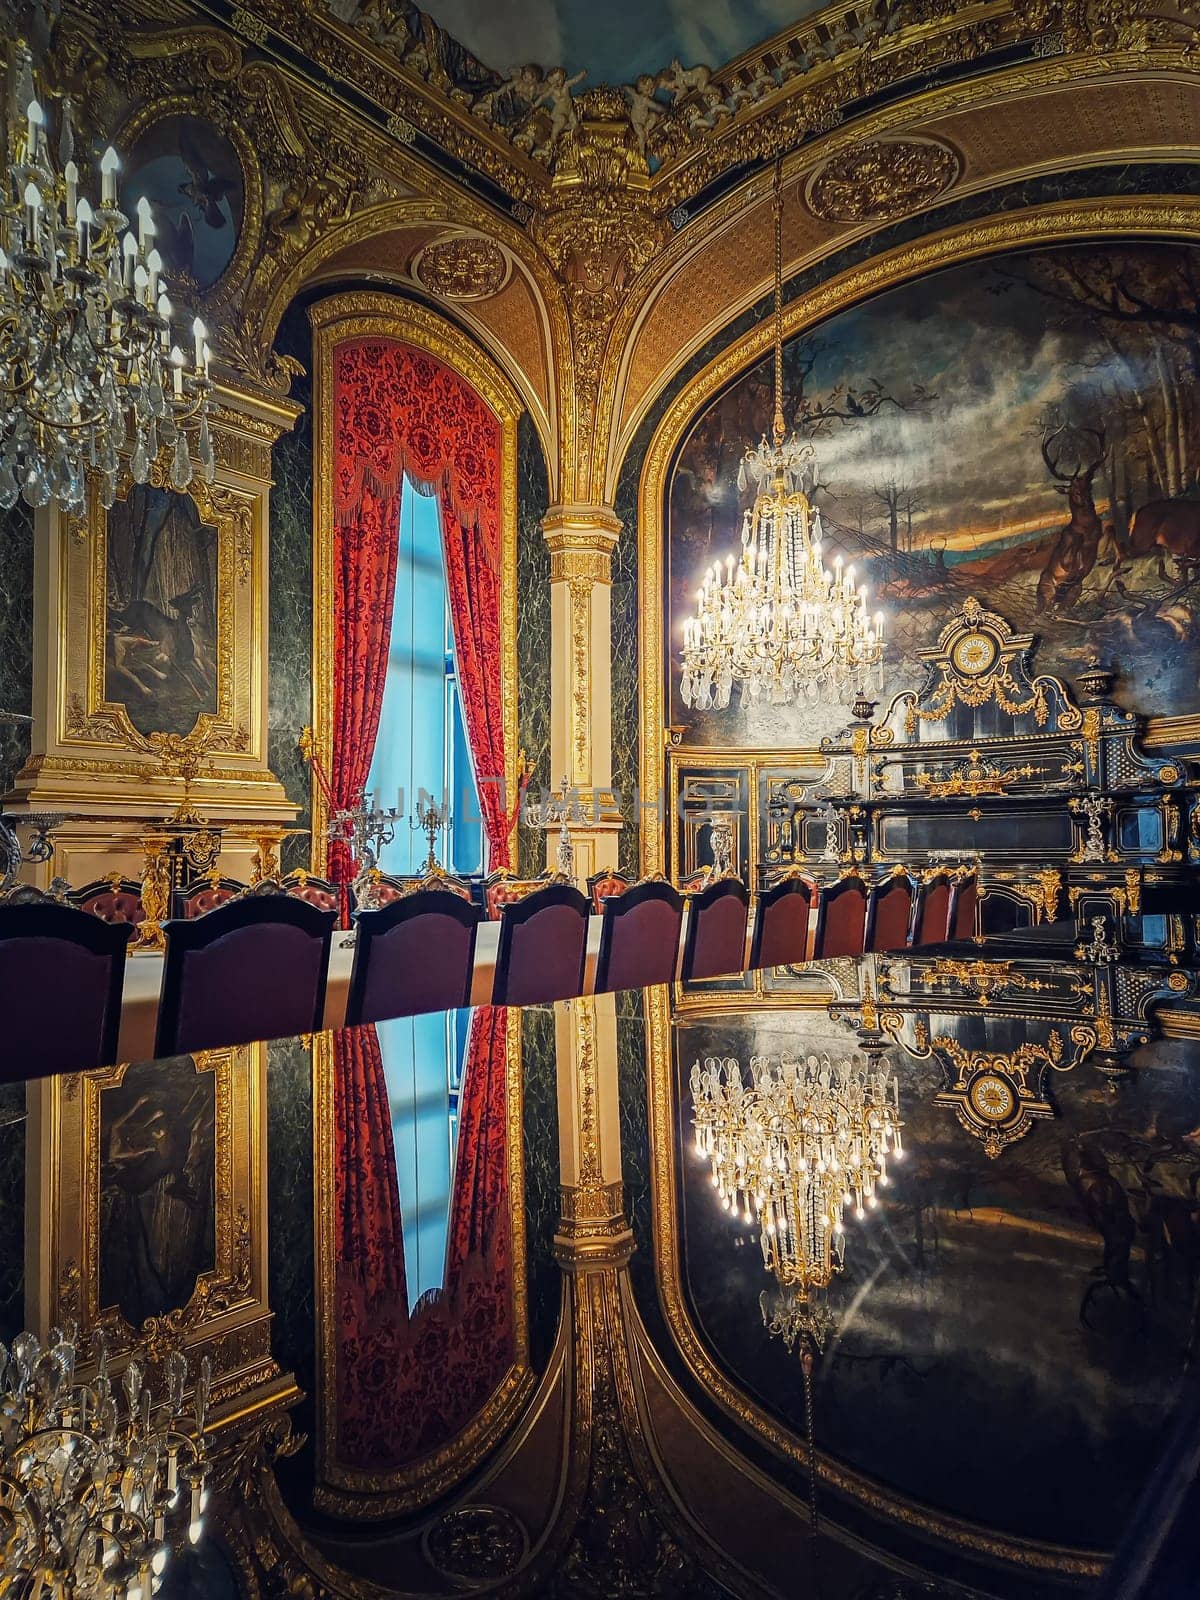 Dining room of Napoleon III at the Louvre Museum. Beautiful decorated royal family apartments, ornate with gold, mural paintings and crystal chandeliers suspended from ceiling by psychoshadow